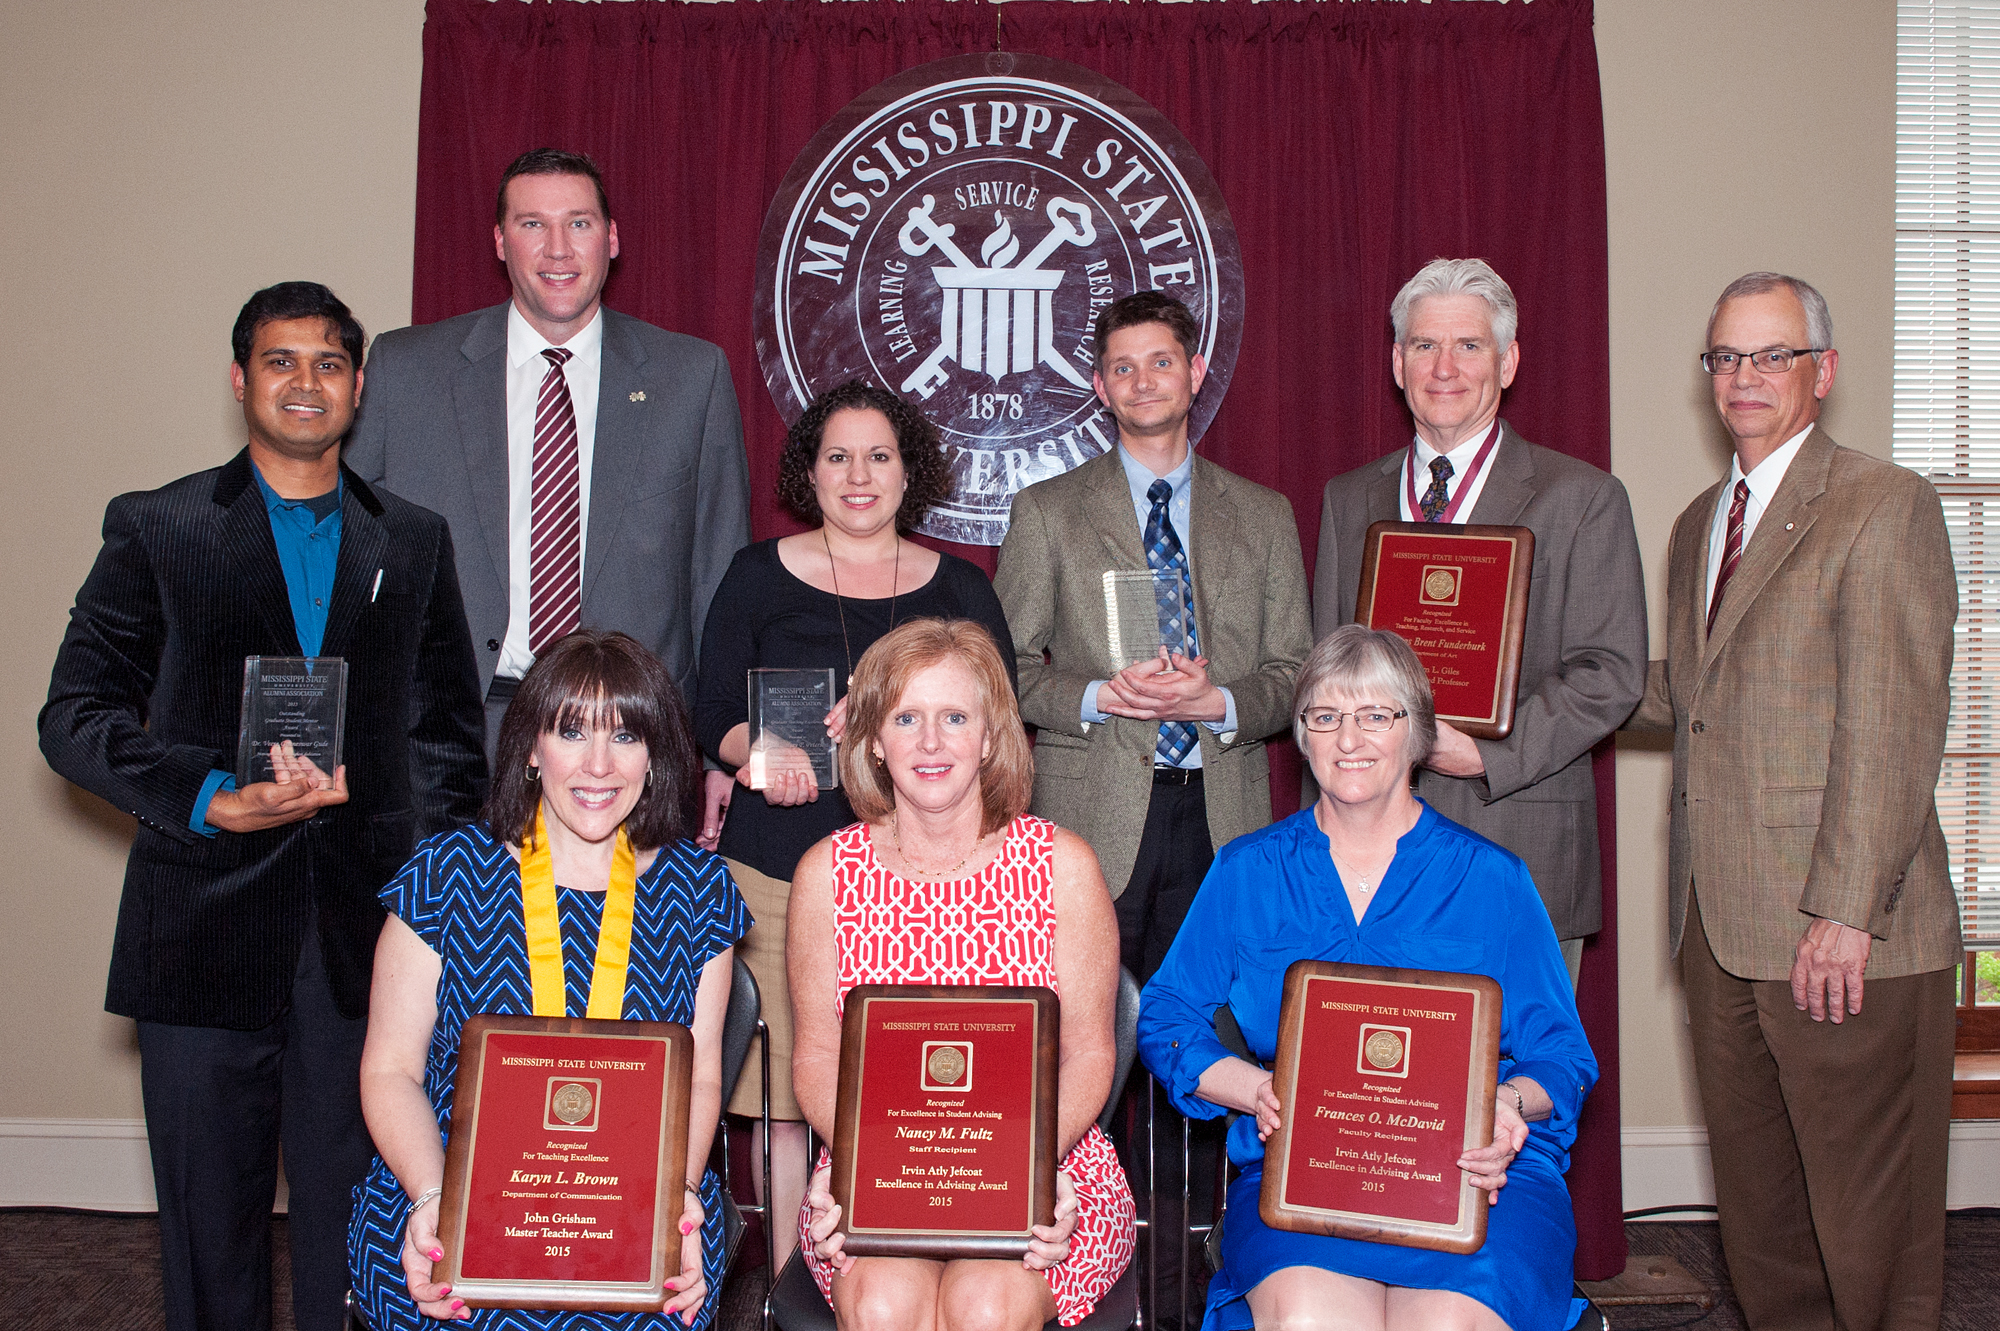 MSU's 2014-15 faculty award honorees include (seated, from left) Karyn Brown, Nancy Fultz, and Frances McDavid, (standing, from left) Veera Gude, Lindsey Peterson, Jared Keeley, and Brent Funderburk. The honors were presented by MSU Alumni Association Executive Director Jeff Davis (standing, second from left) and Provost and Executive Vice President Jerry Gilbert (at far right).